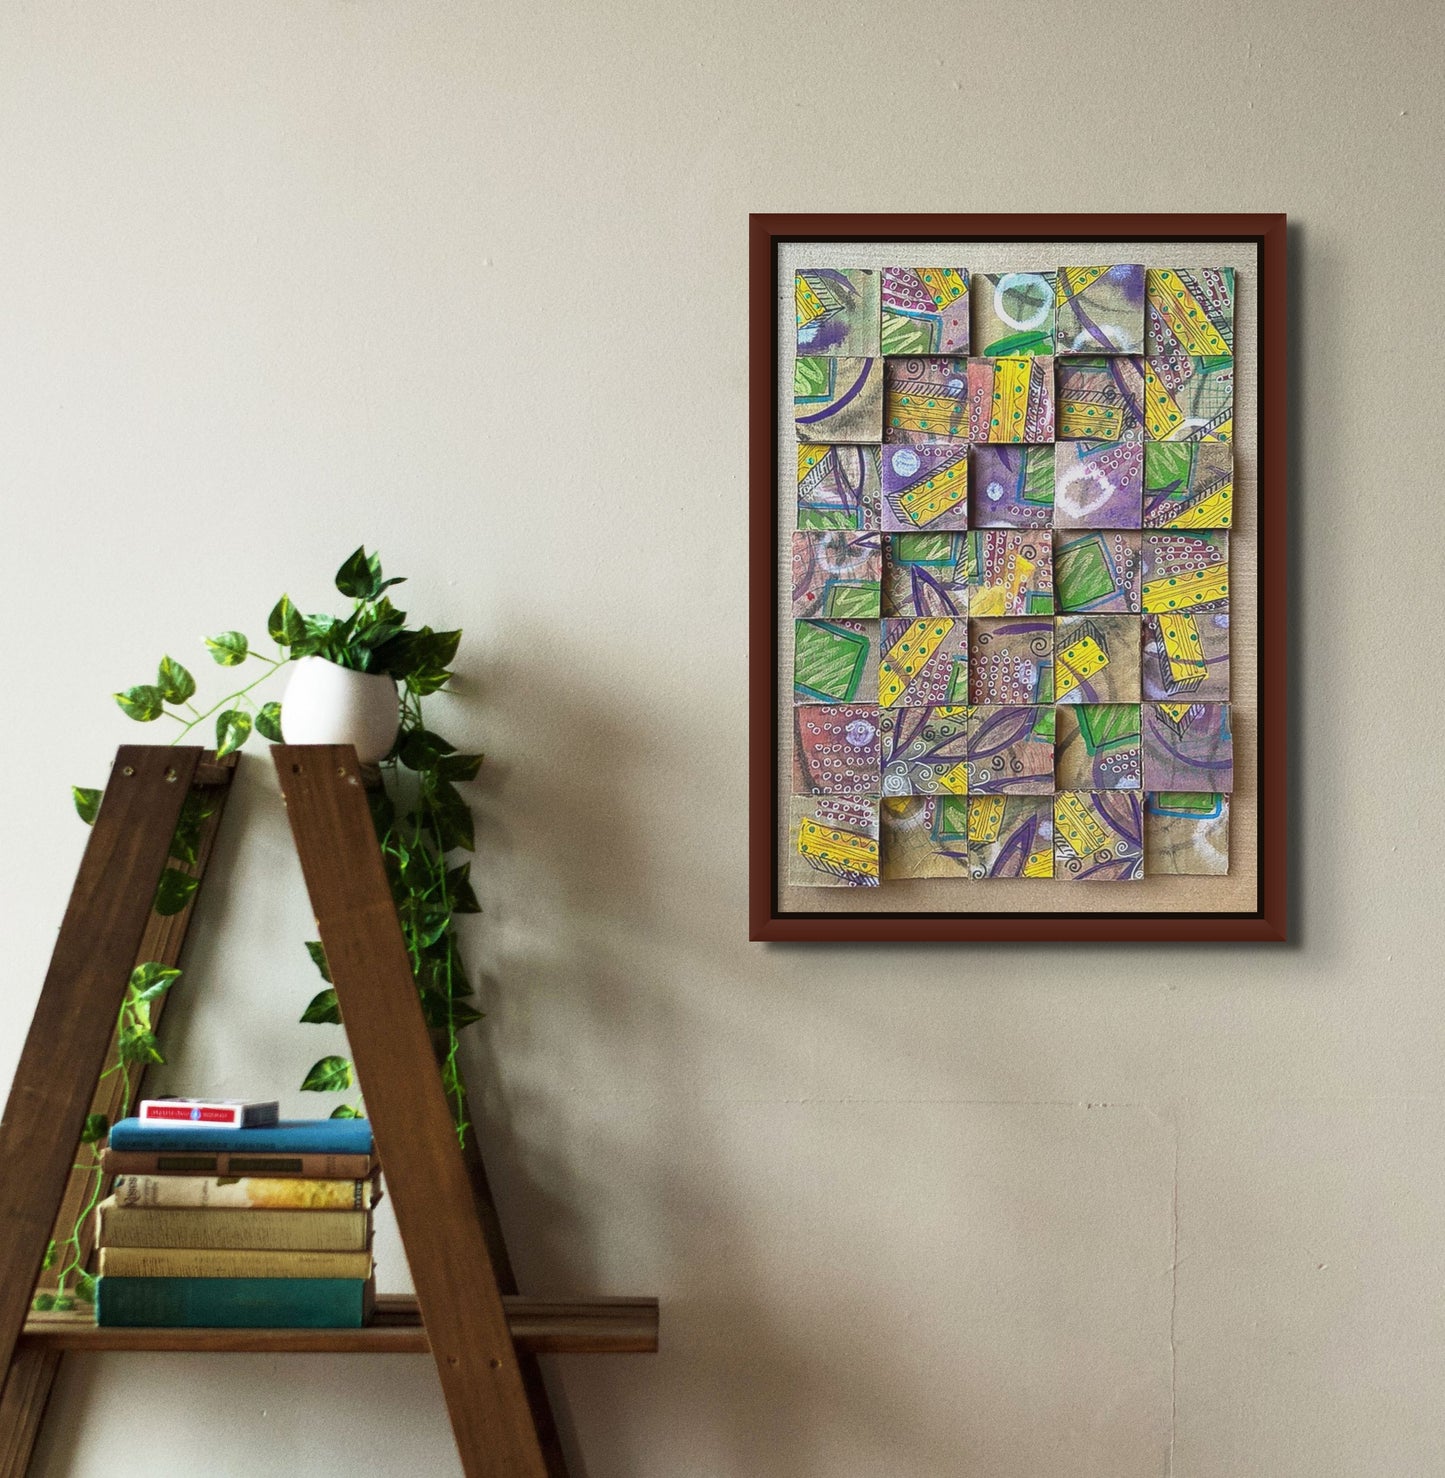 Mixed media, on cardboard with added individual graphic cardboard tiles, titled Patchwork by artist Jenifer Hernandez, framed for display only in cherry wood and floated against black background.